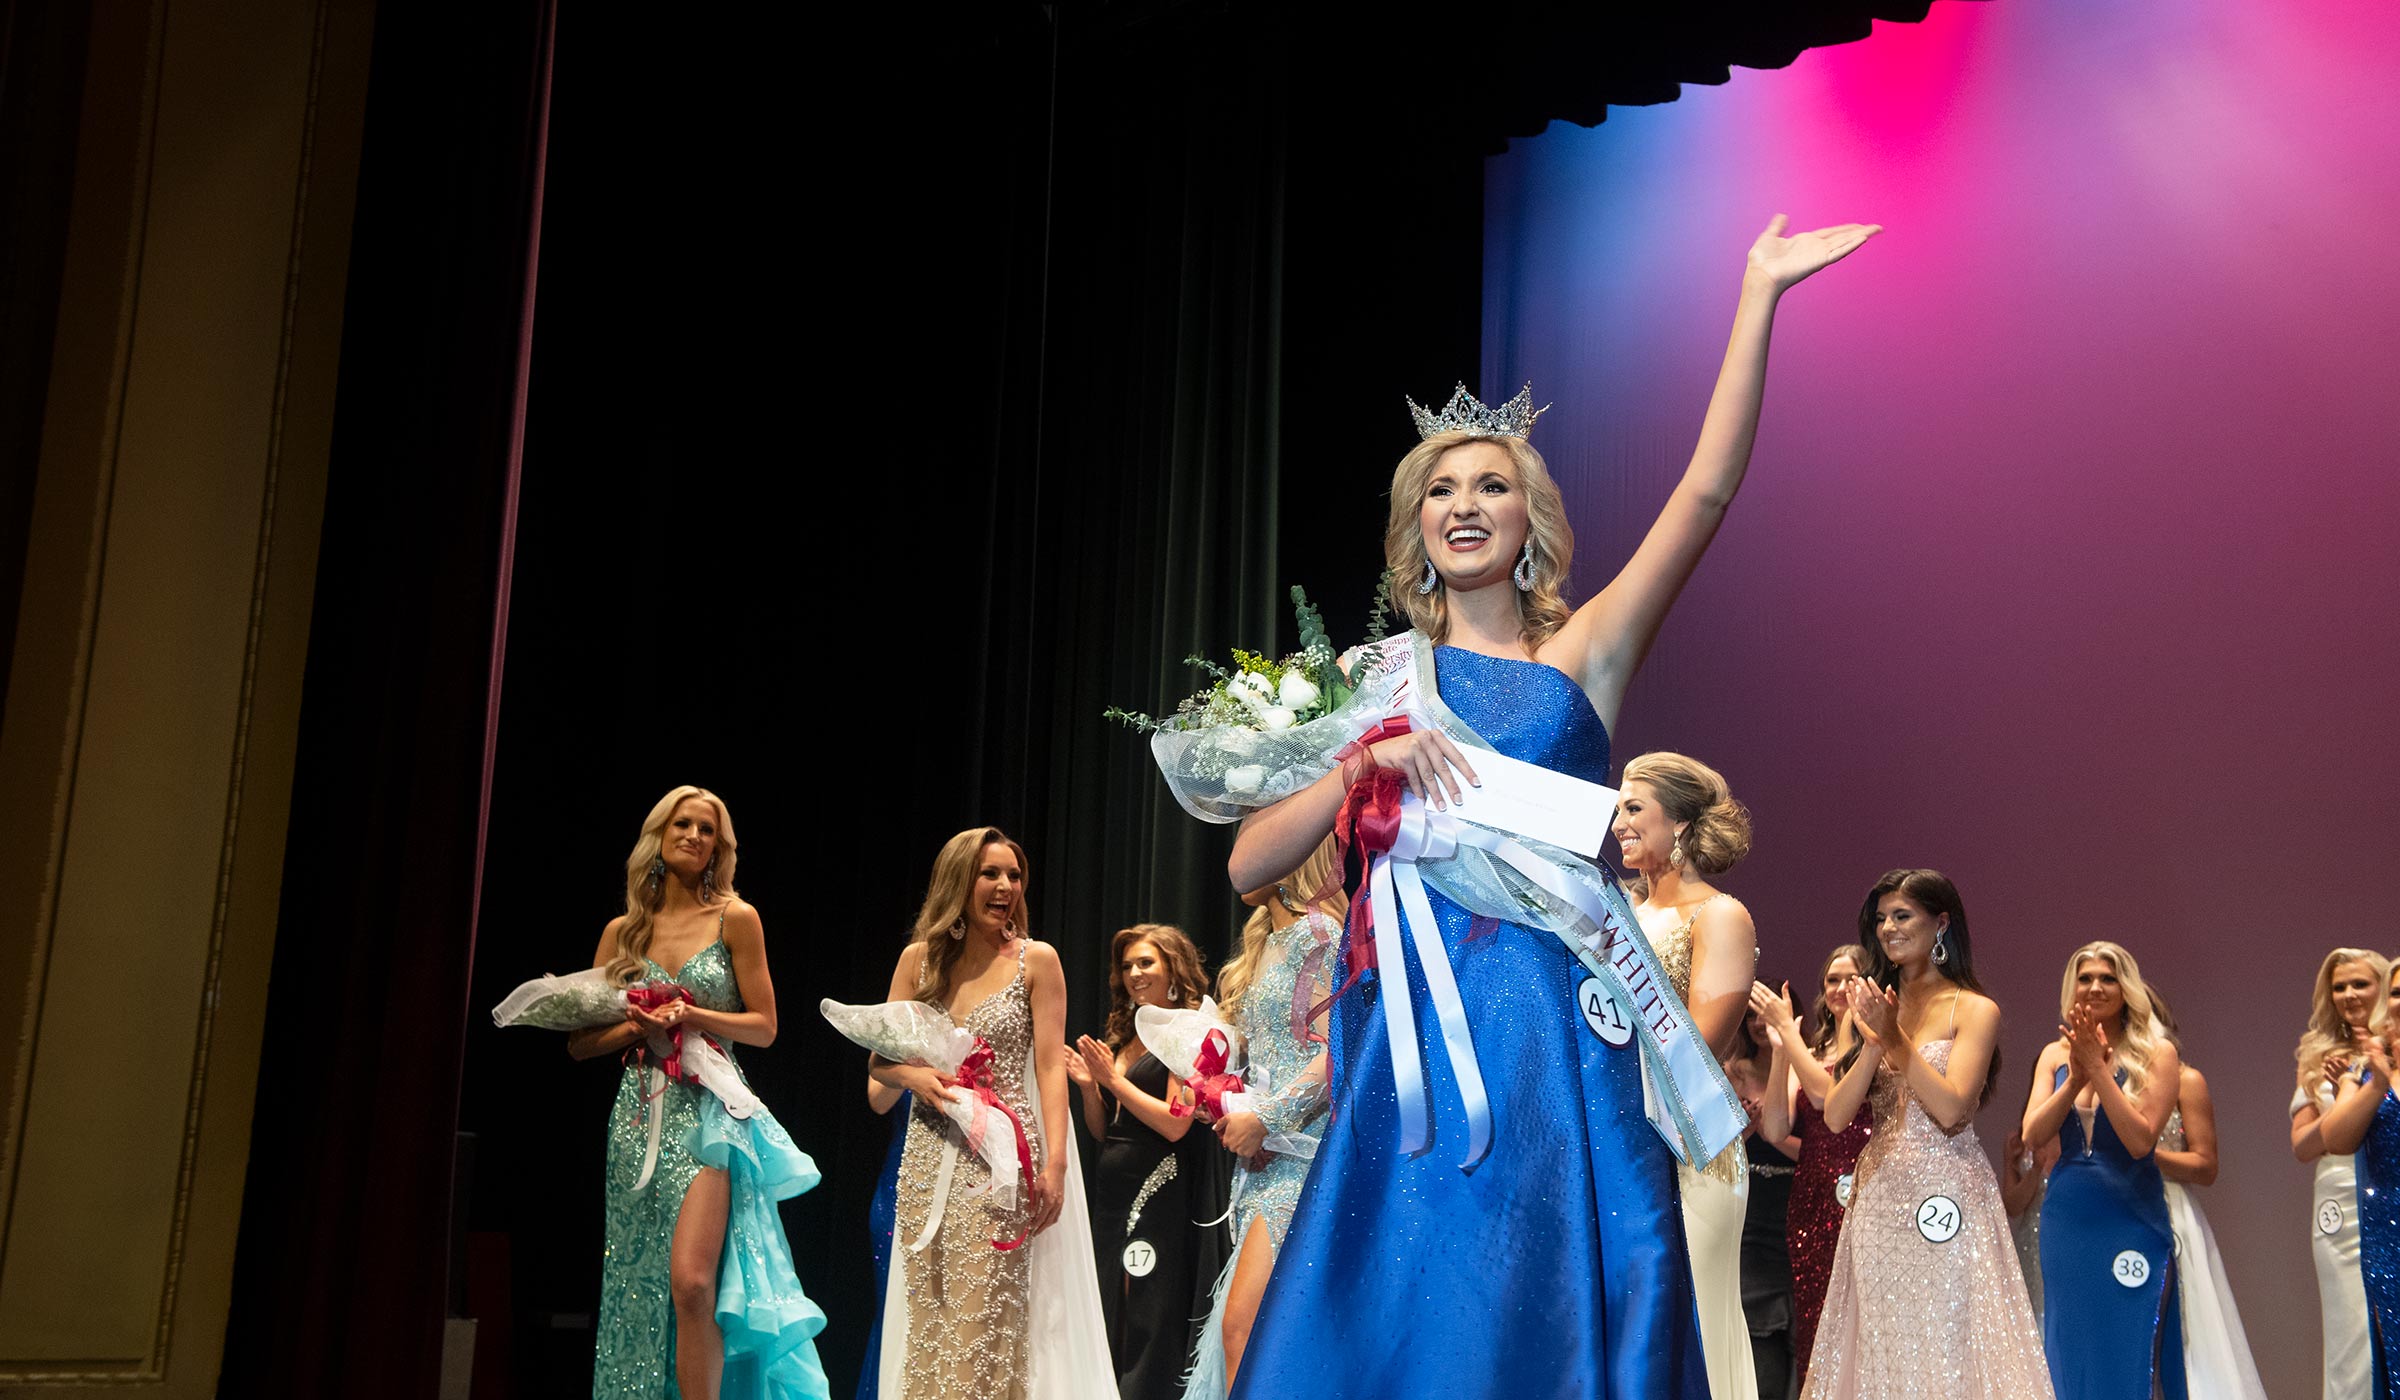 Female in blue gown with sash, crown, and flowers waving at crowd